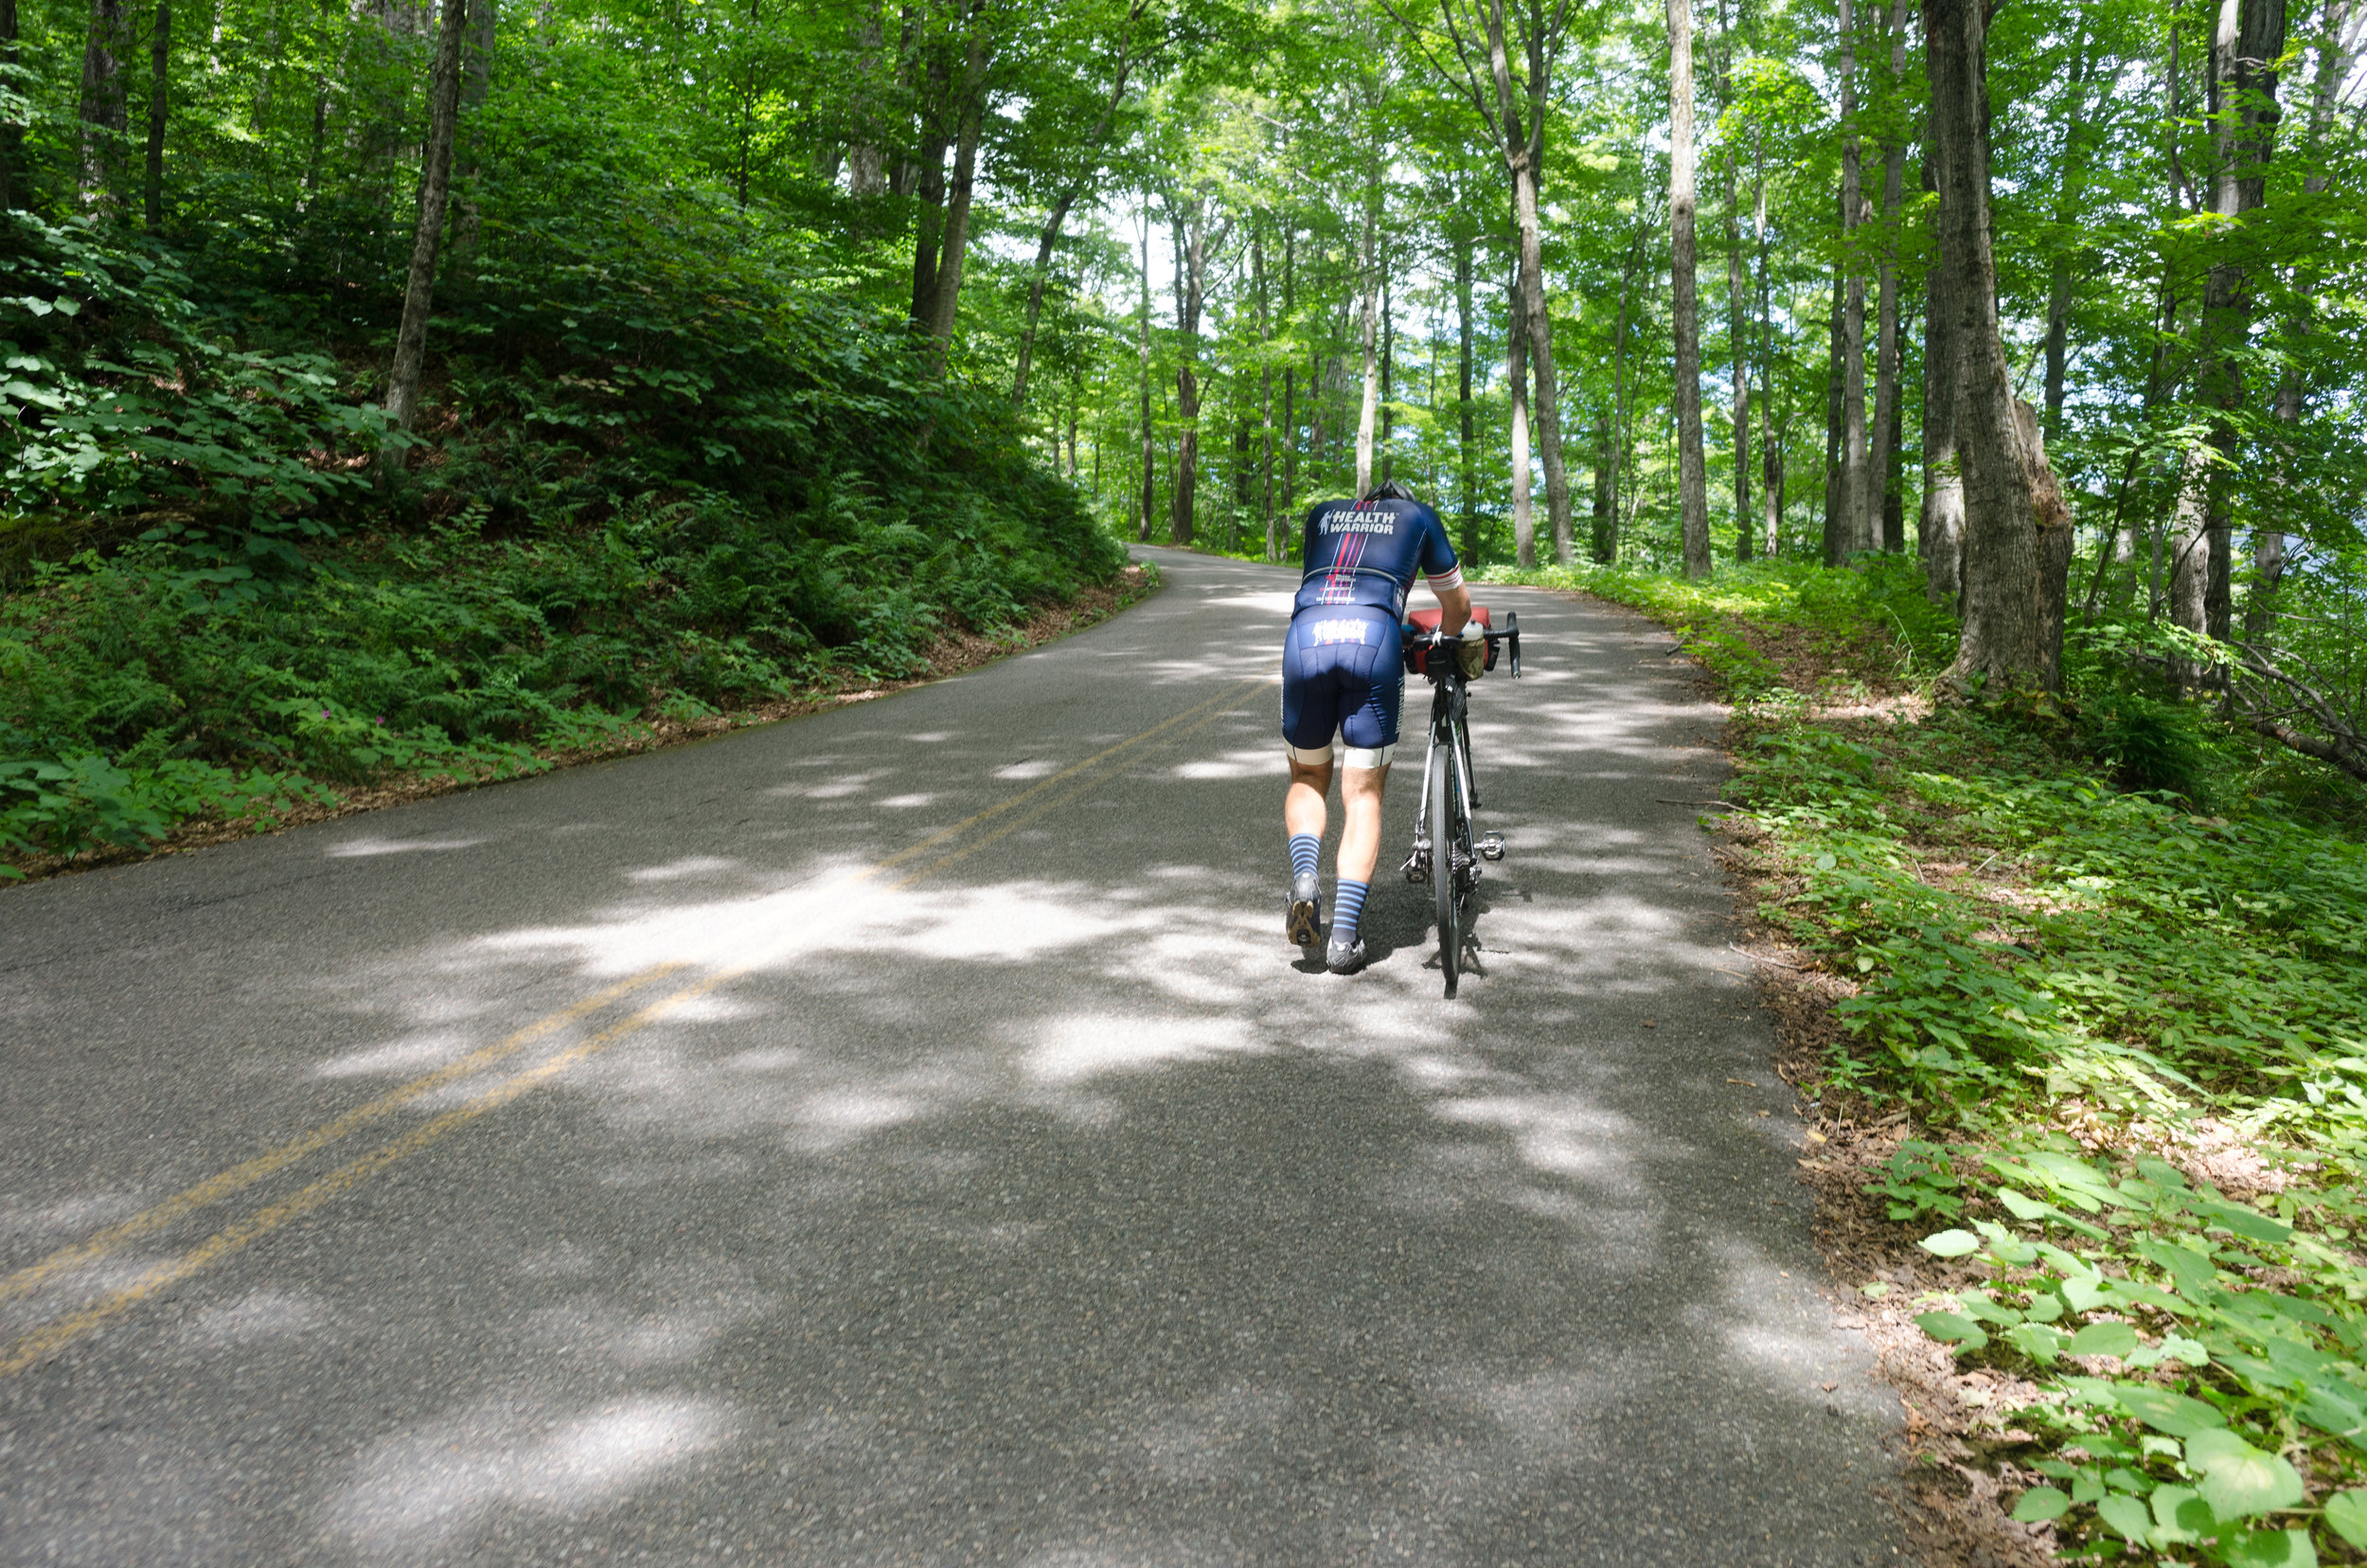  Of course we decided to ride Lincoln Gap - the steepest paved road in North America which we were not at all equipped to ride with our loaded touring bikes. It was a sobering walk. 